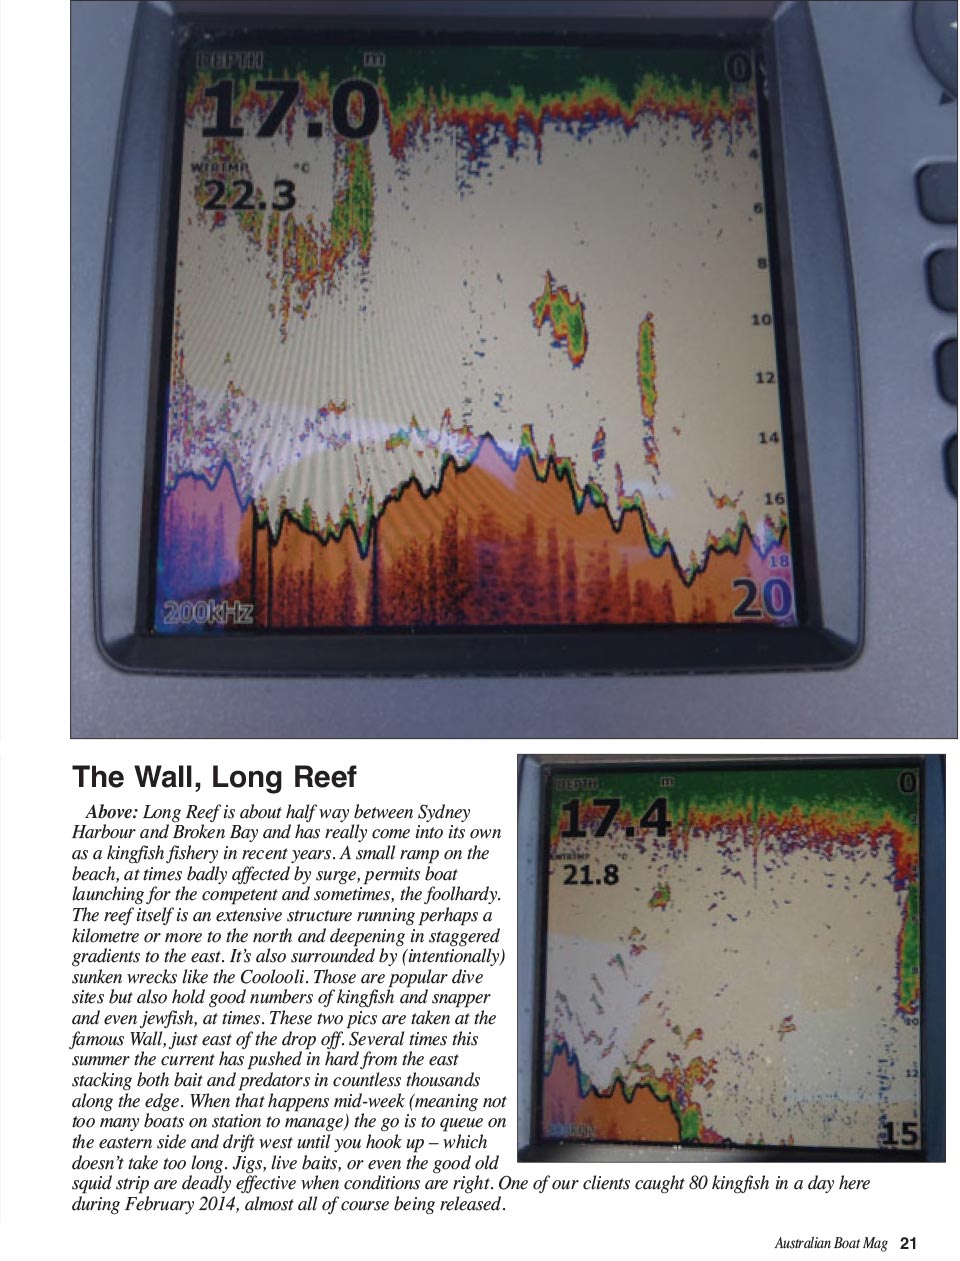 Where the reef ends shown on a Lowrance depth sounder